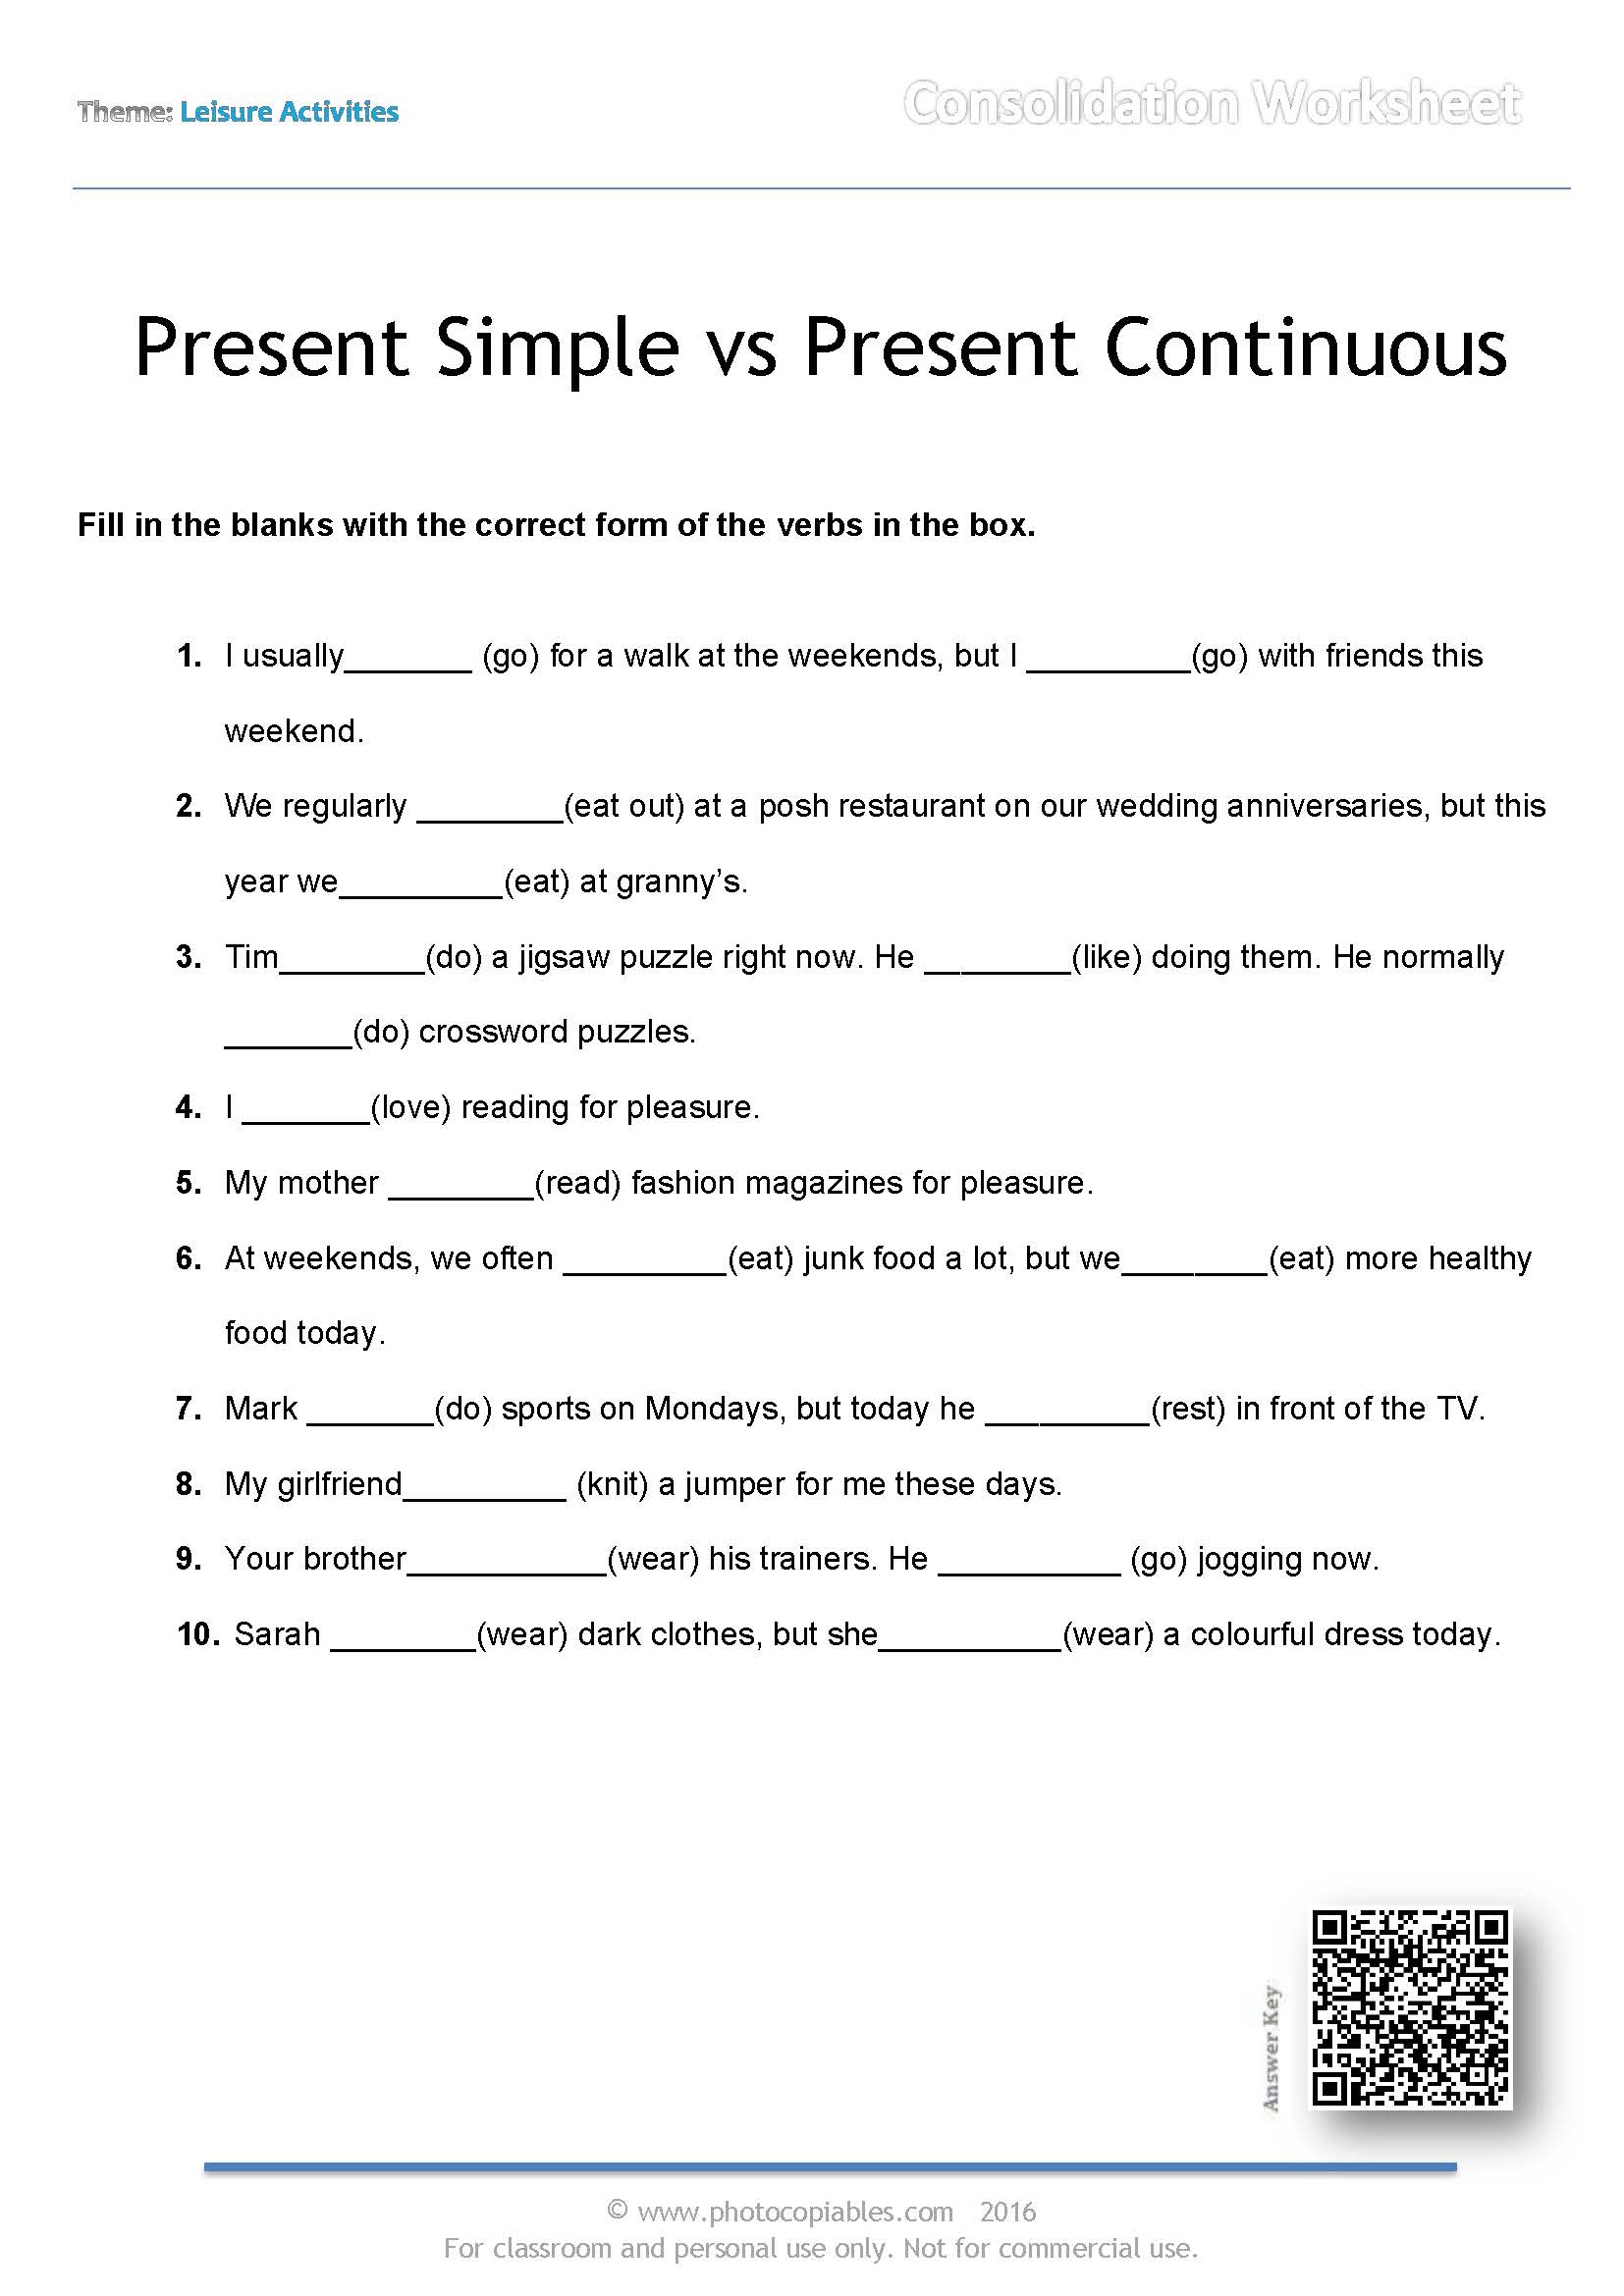 present-simple-vs-present-continuous-consolidation-worksheet